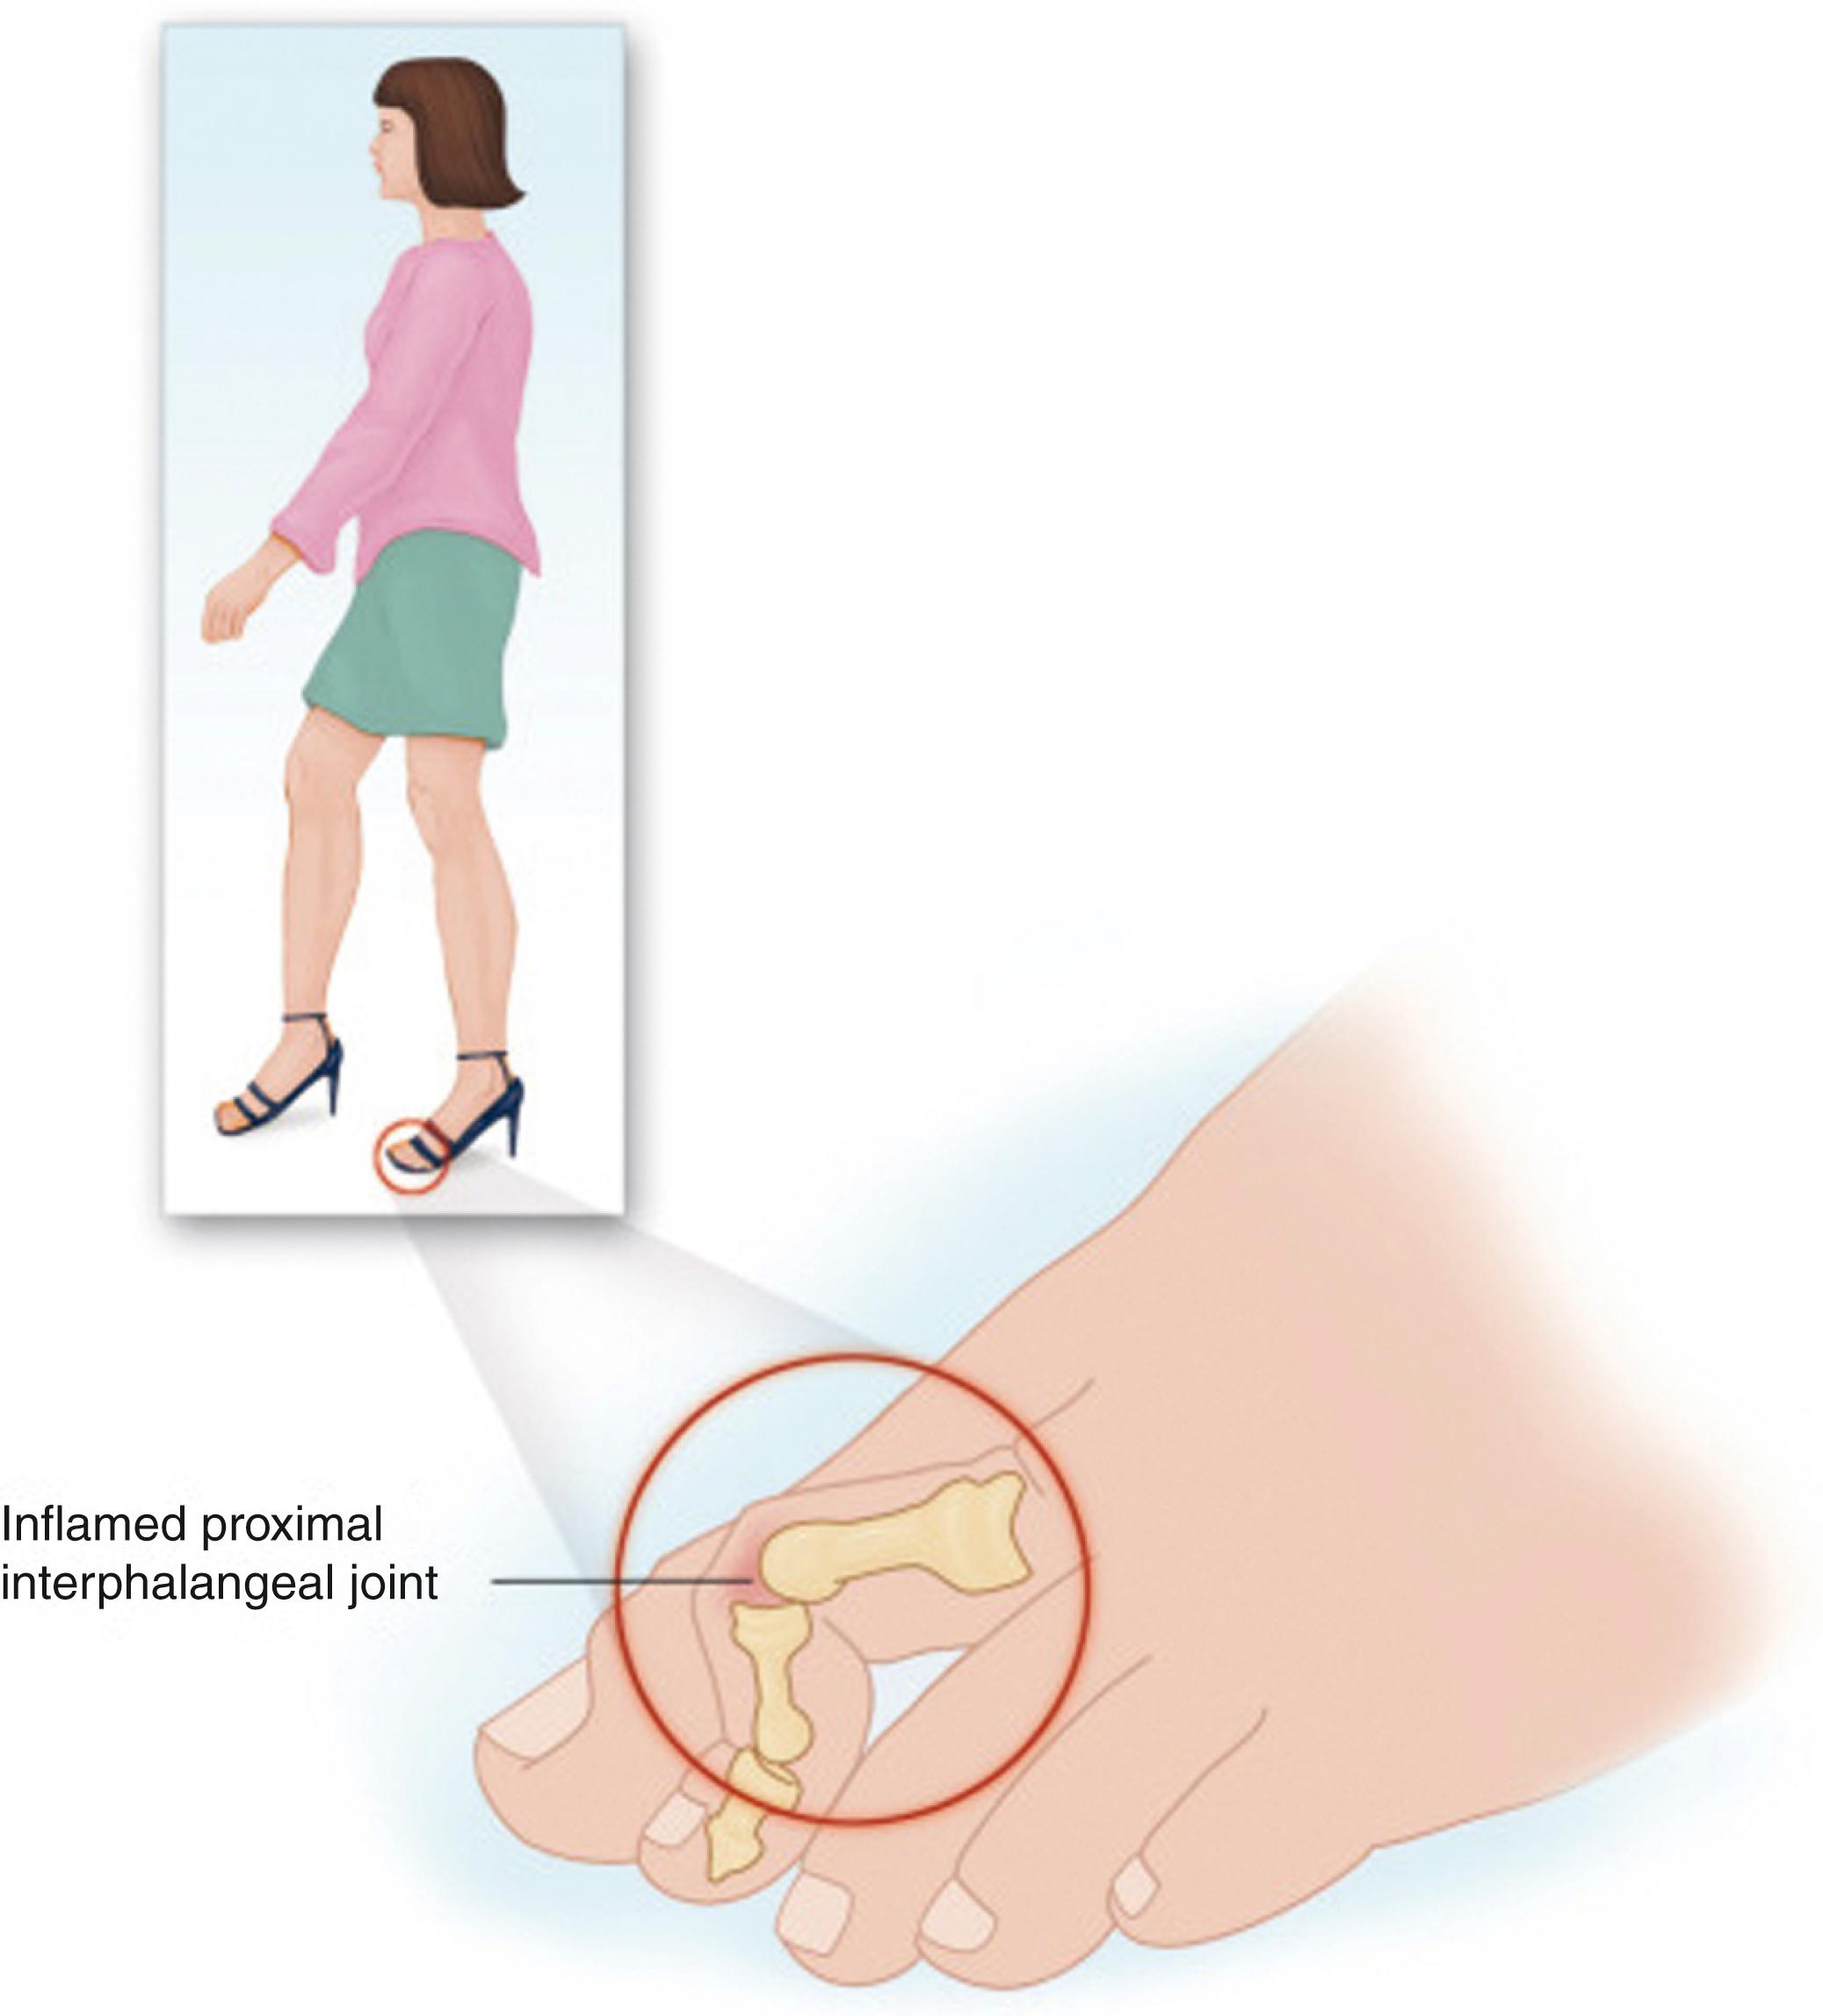 FIG. 196.2, Like hallux valgus deformity, hammer toe deformity usually is a result of wearing shoes that are too tight, although trauma also has been implicated. Wearing high-heeled shoes may exacerbate the problem.